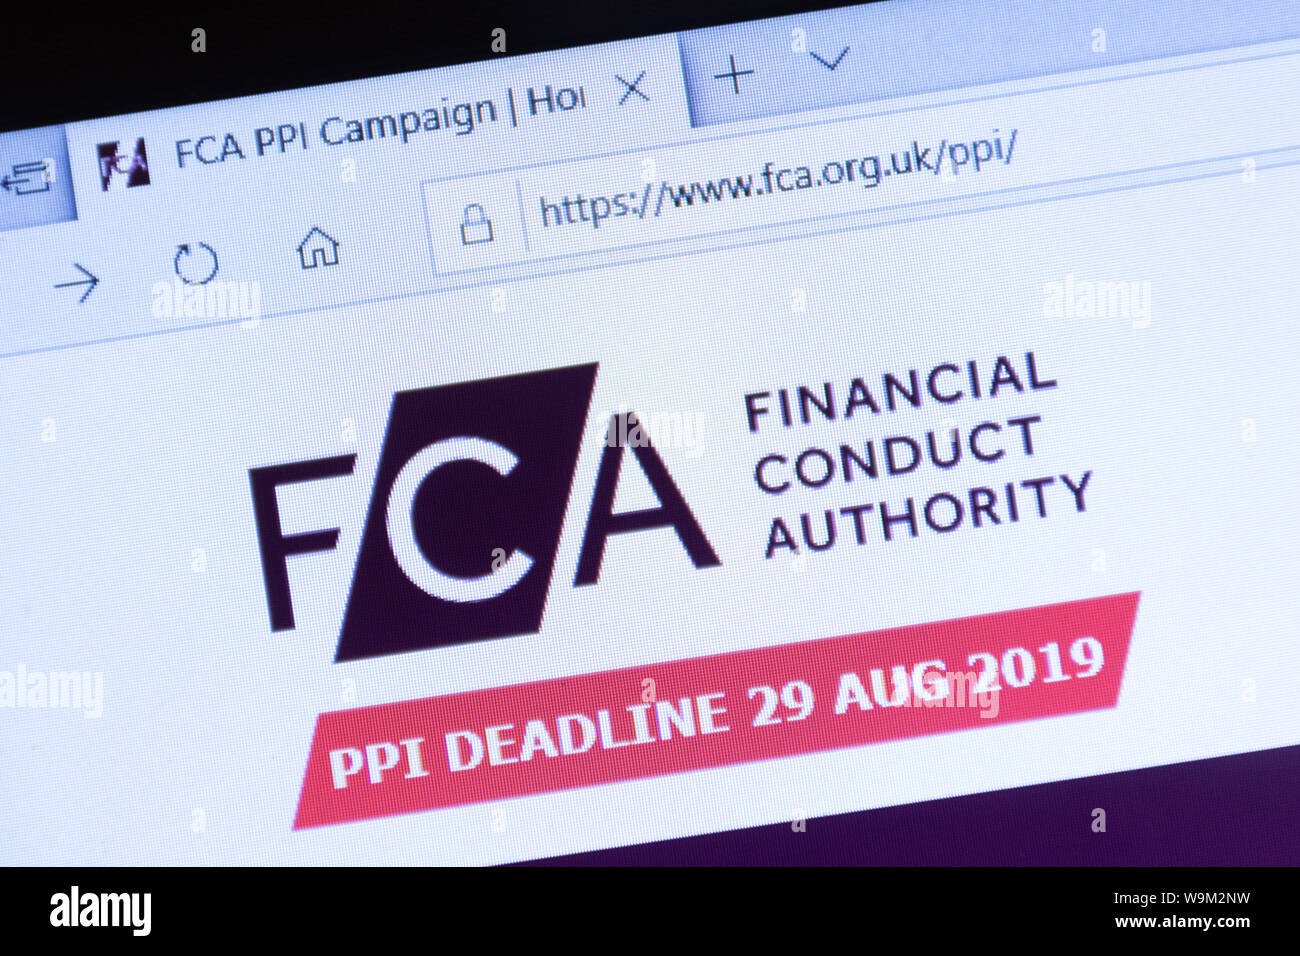 PPI claim deadline 29 August 2019 on the FCA (Financial Conduct Authority) website displayed on a laptop screen screenshot, UK. Stock Photo